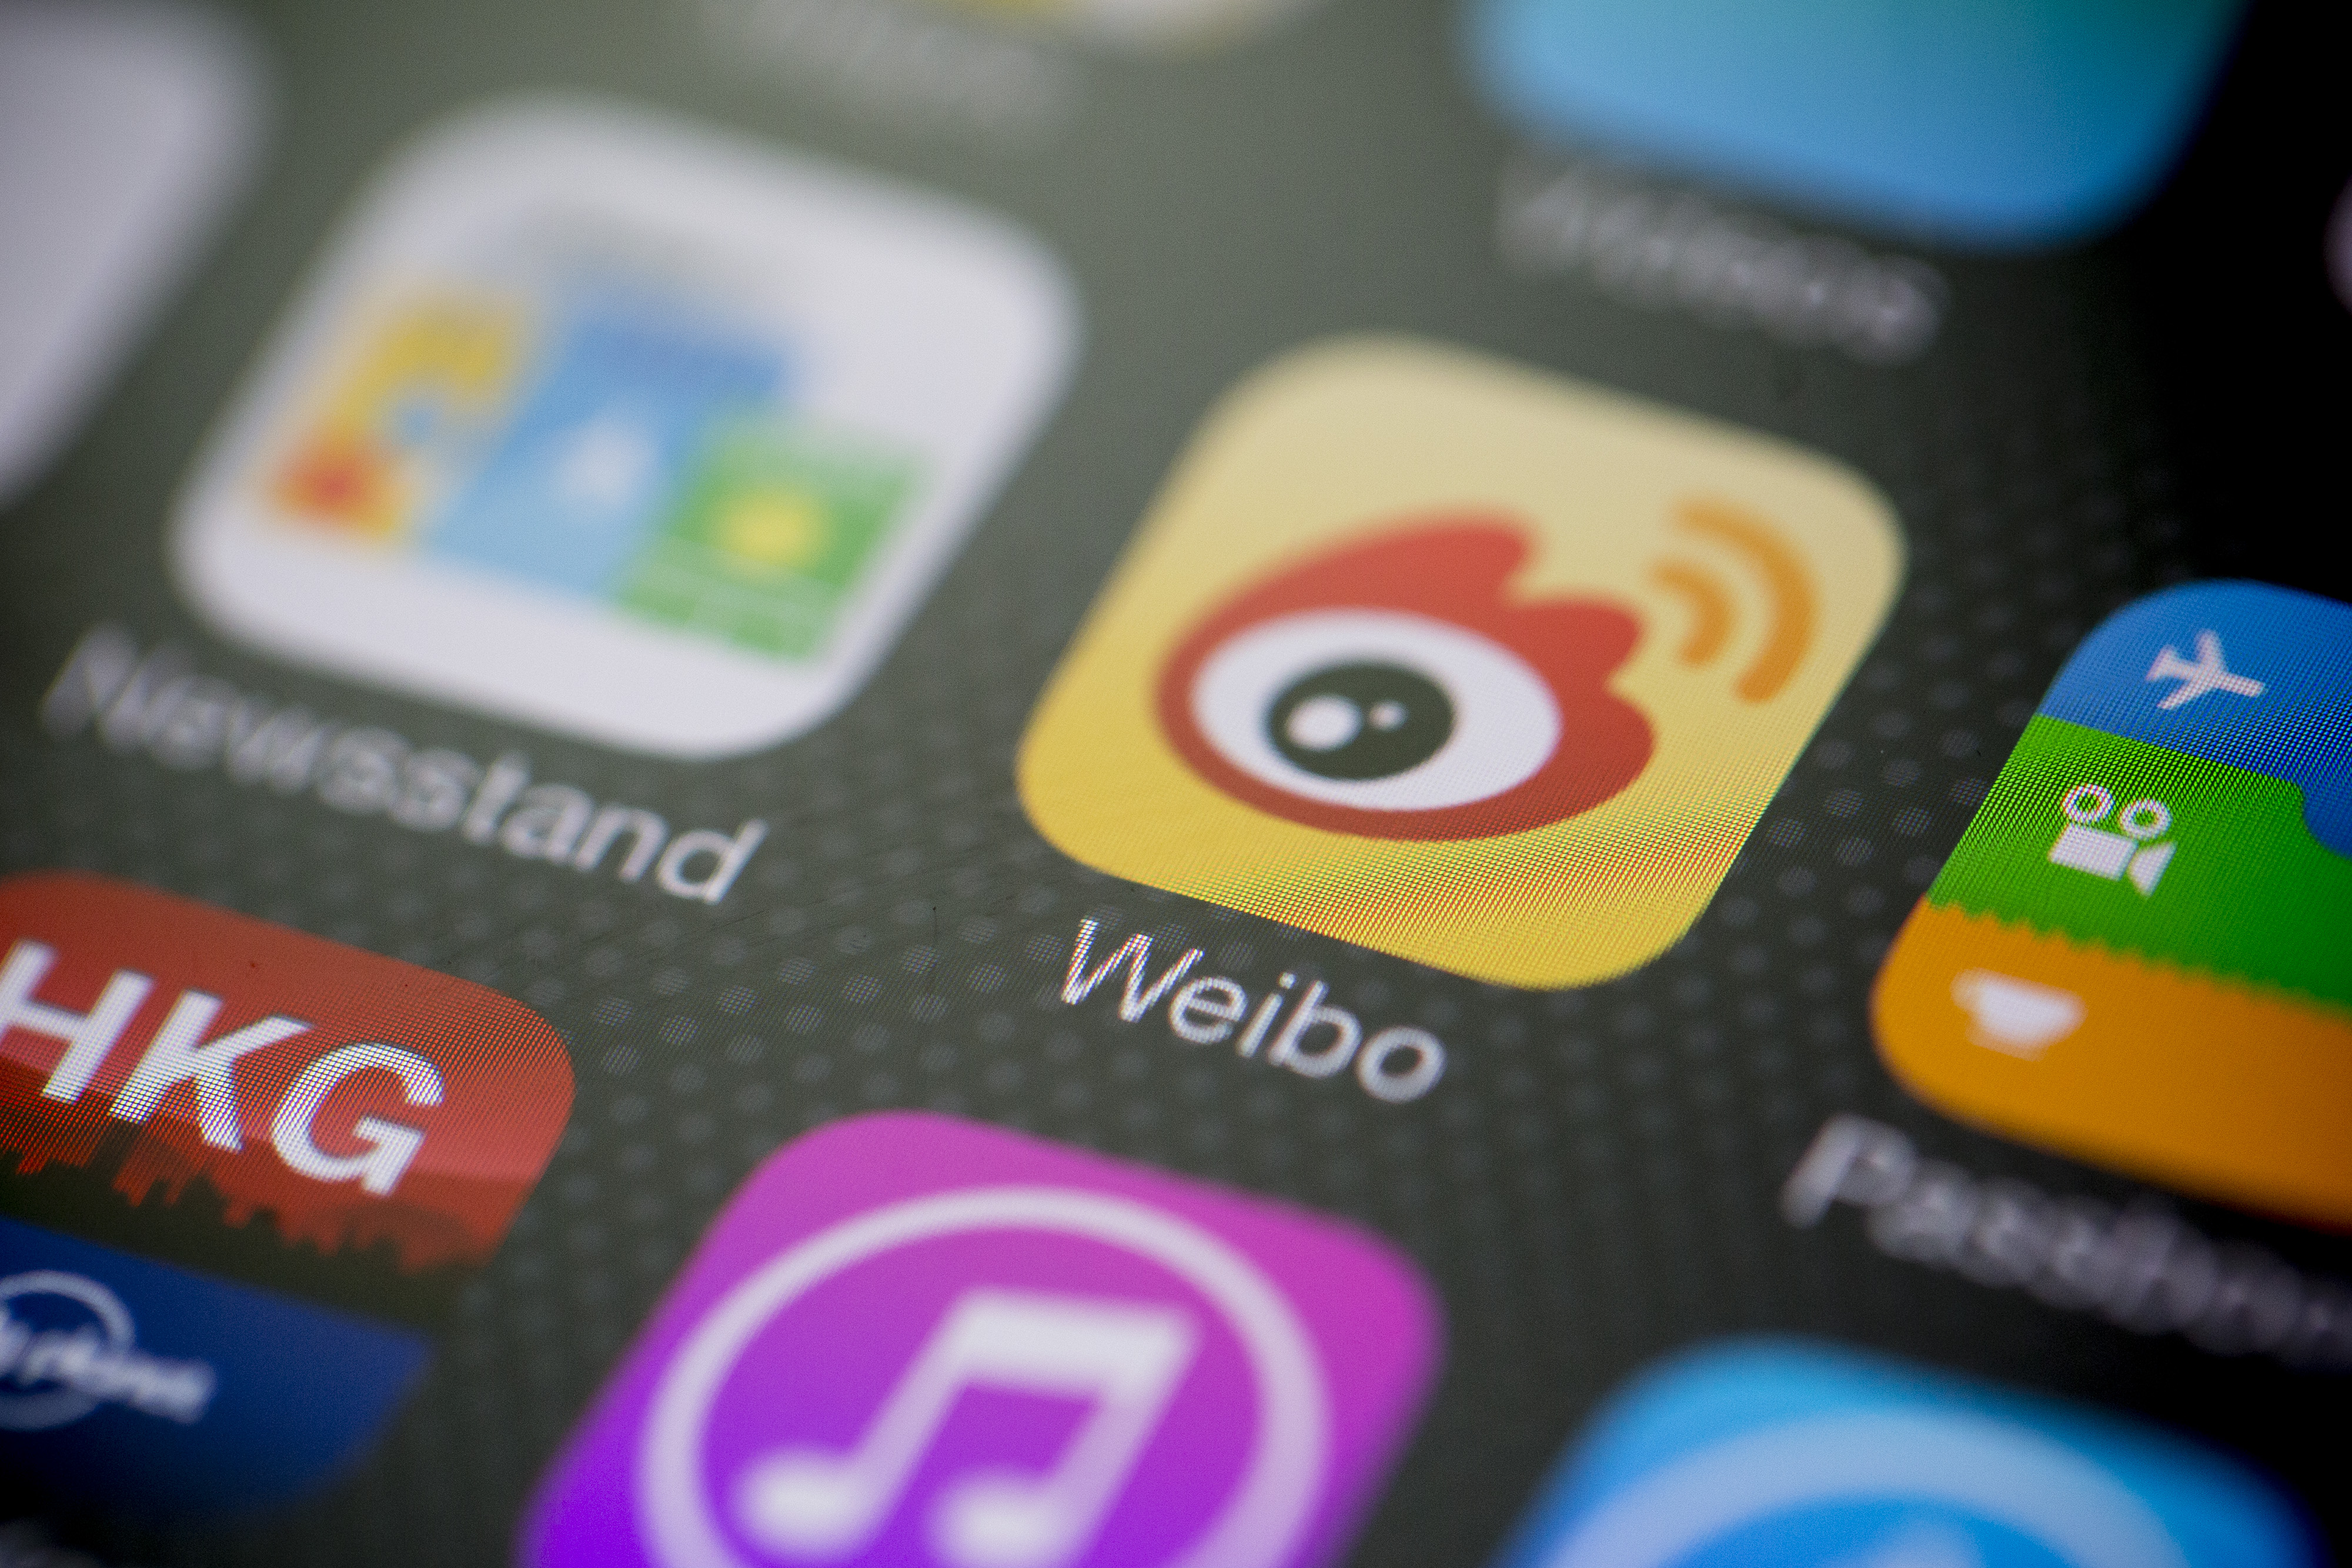 Sina Corp.'s Sina Weibo microblogging service app icon is displayed on an Apple Inc. iPhone 5s in an arranged photograph in Hong Kong, China, on Tuesday, April 22, 2014. (Bloomberg—Bloomberg via Getty Images)